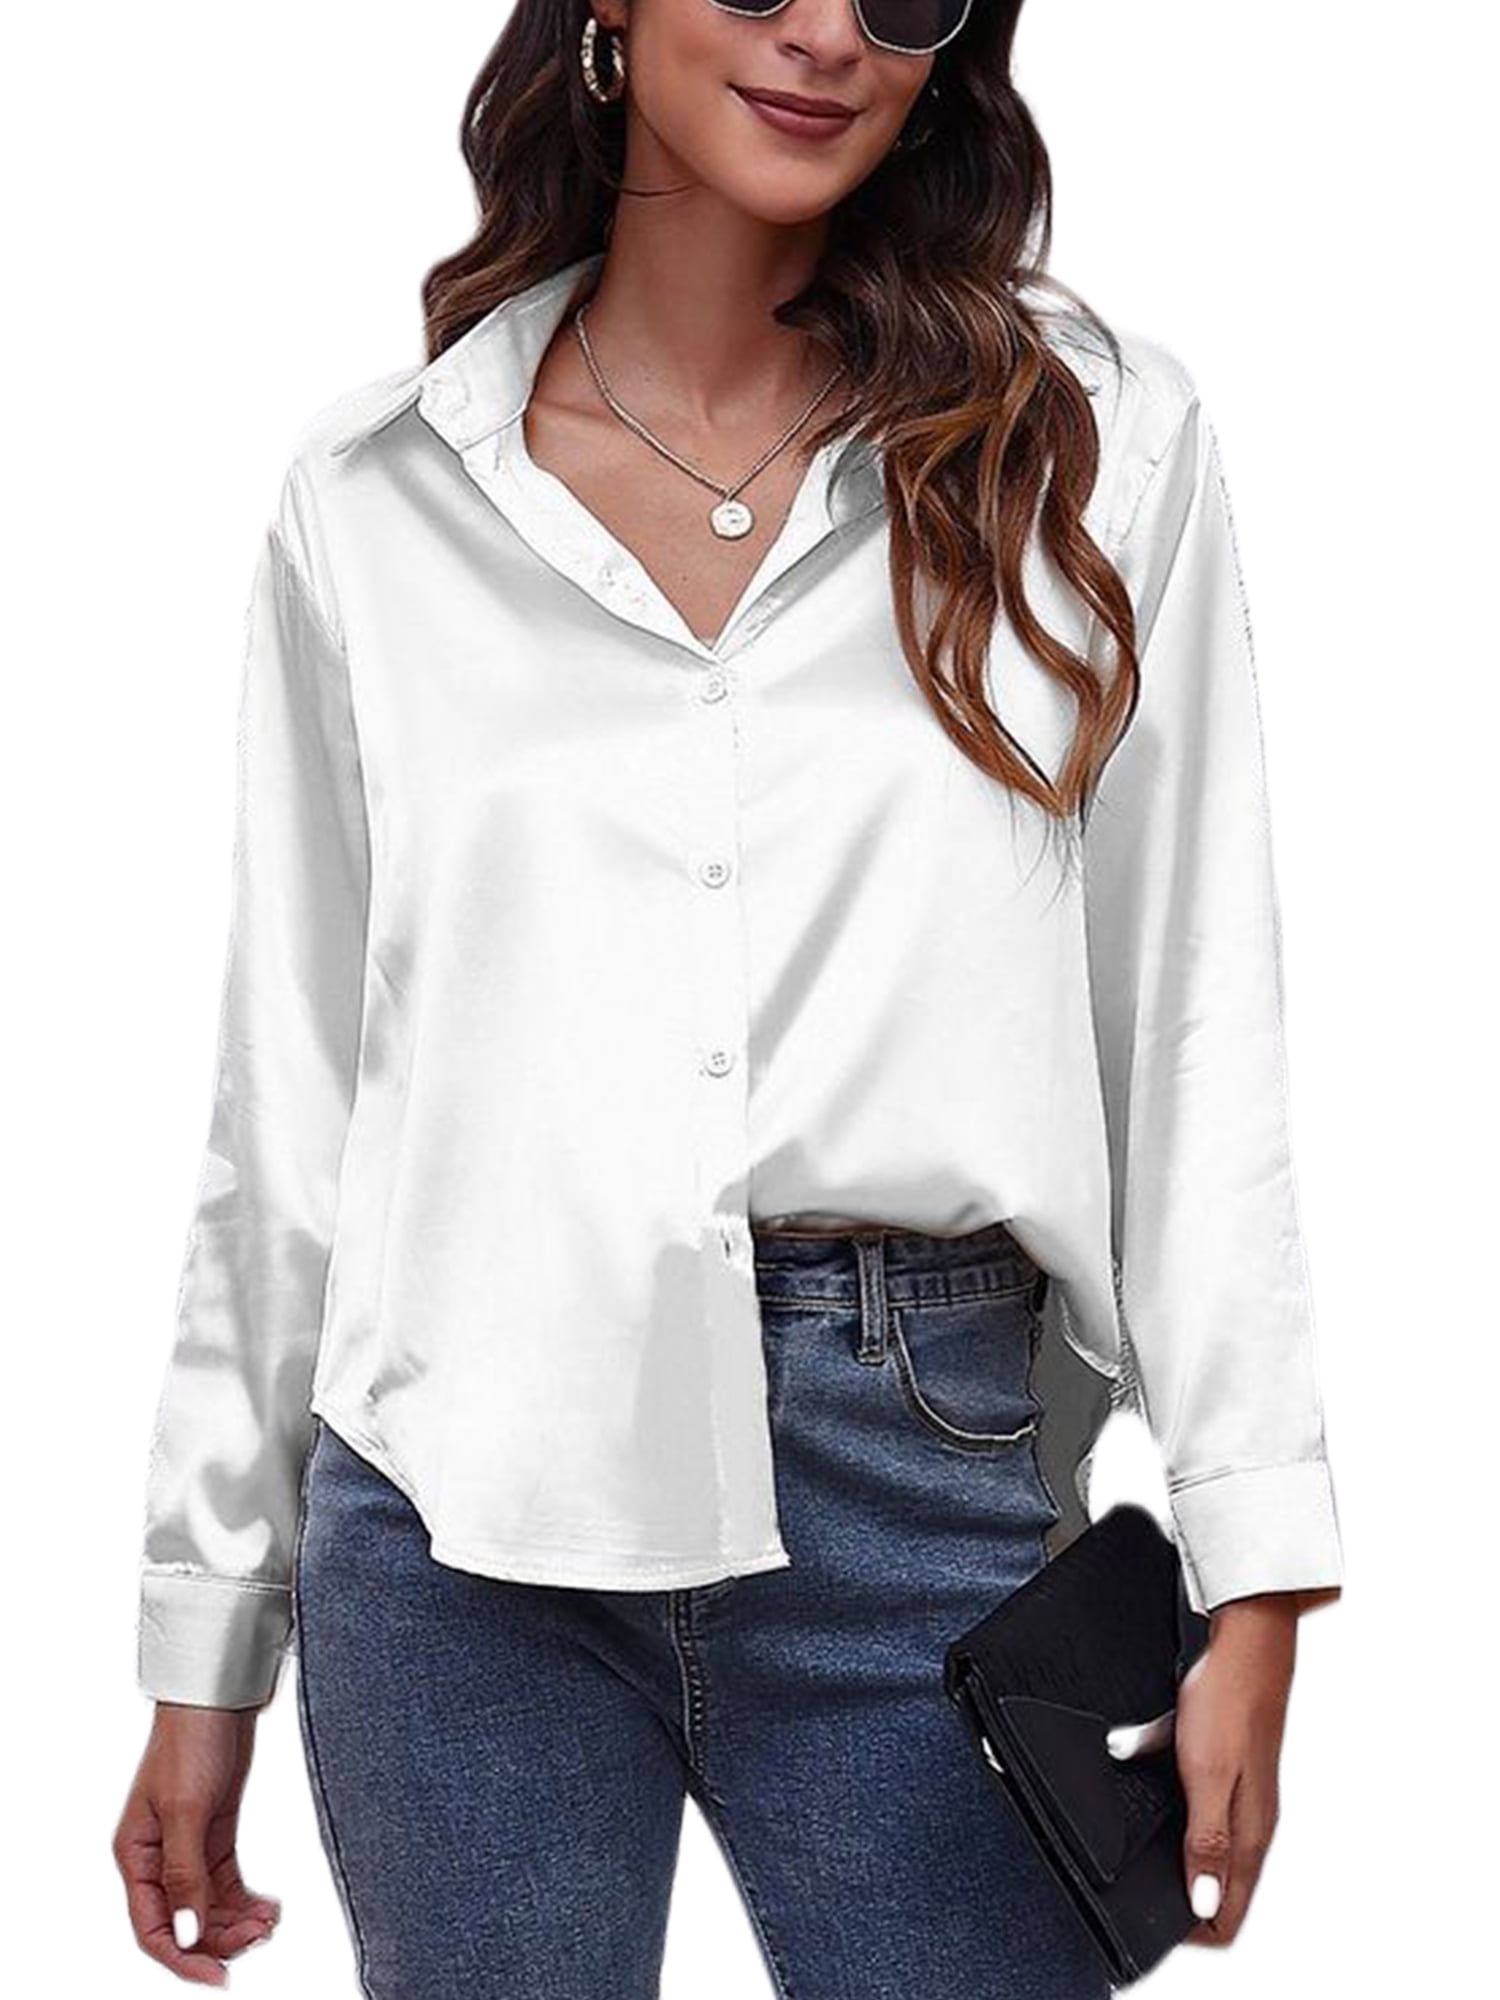 White Shirt for Women Womens Shirts Long Sleeve Plus Size Blouses for Women  2X Girl White Button Down Shirt Long Sleeve Shirts for Women V Neck amazom  Deals Cheap Stuff Under 50 Cents : Clothing, Shoes & Jewelry 